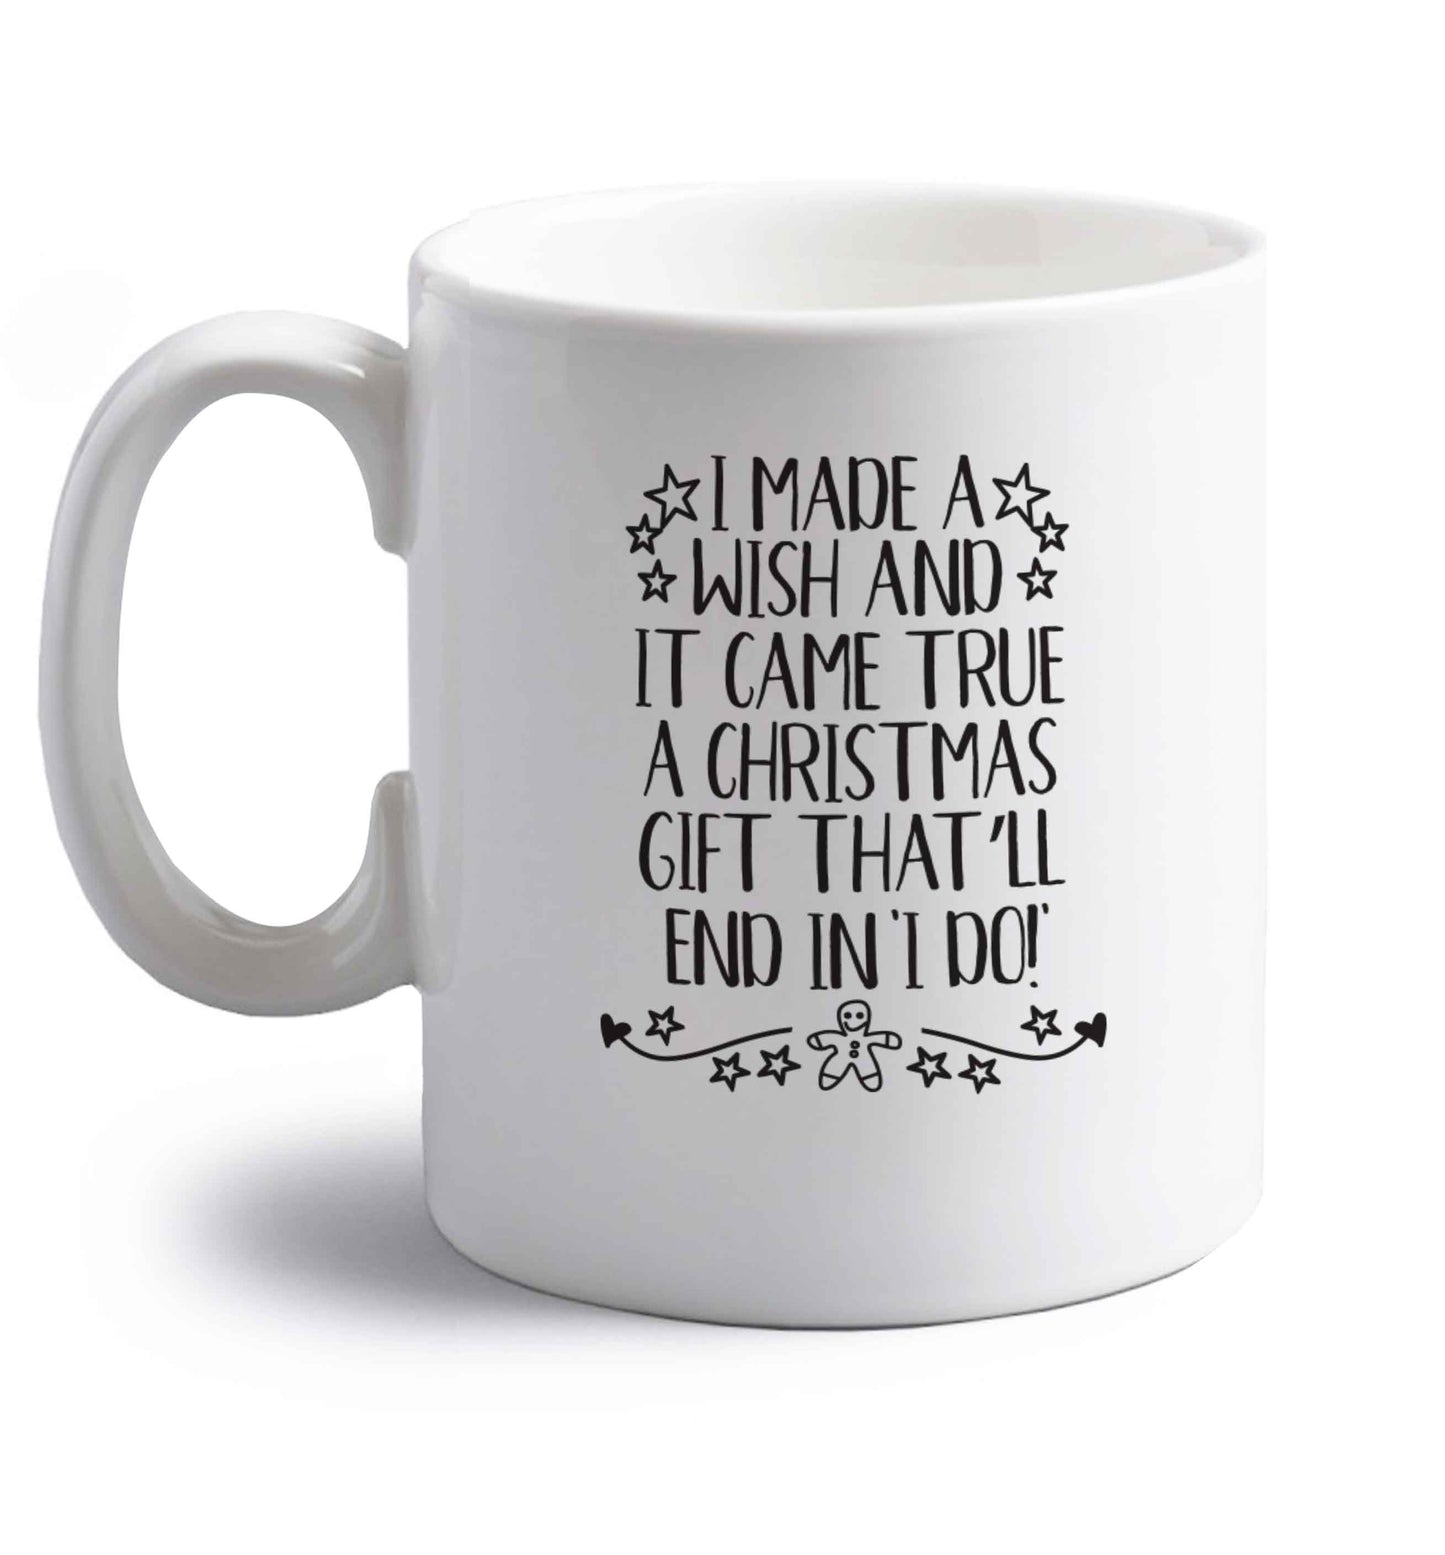 I made a wish and it came true a Christmas gift that'll end in 'I do' right handed white ceramic mug 